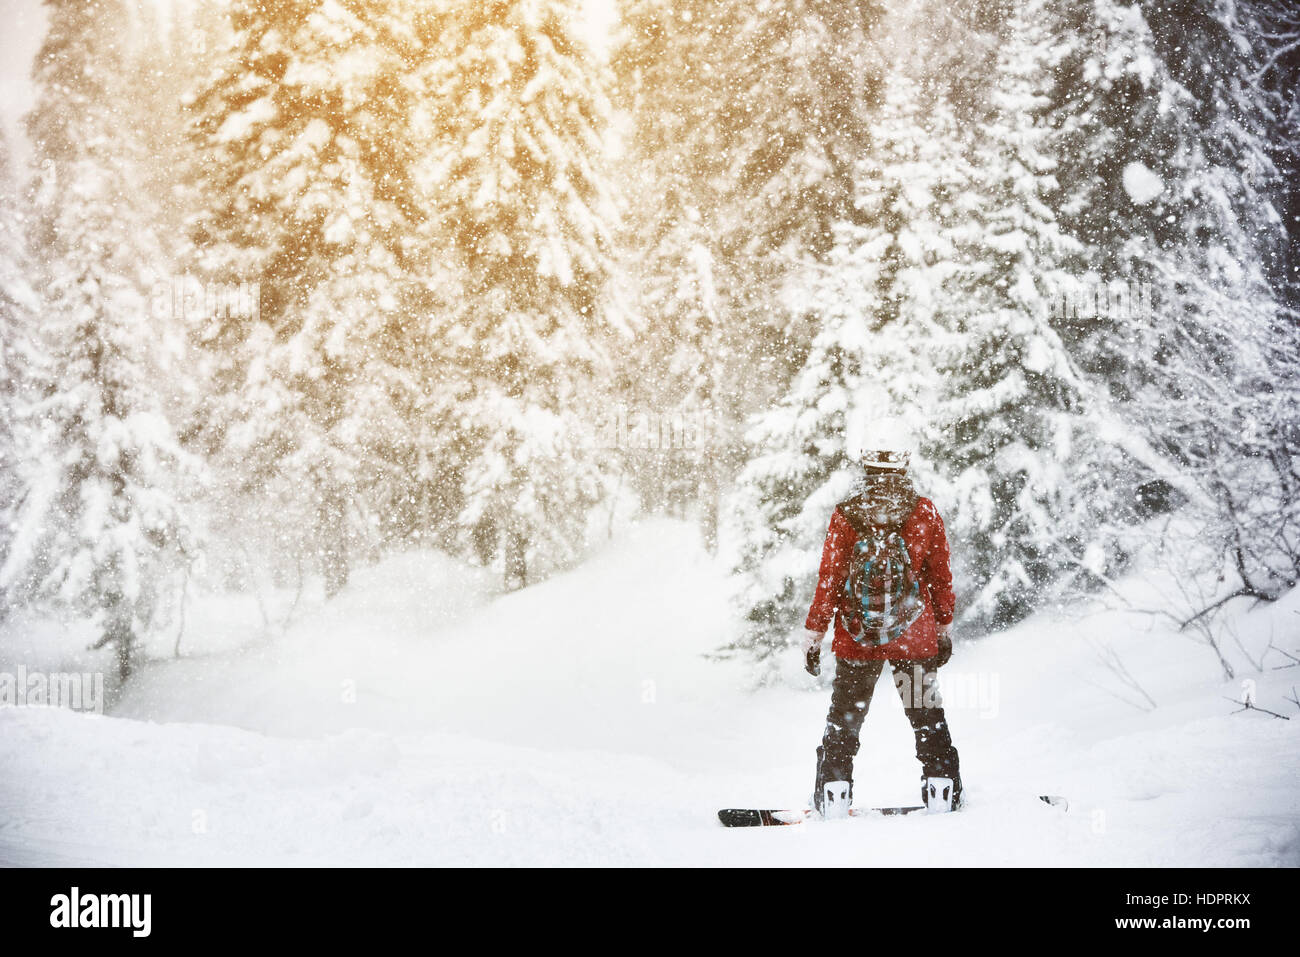 Snowboarder stands snow frozen forest backcountry Stock Photo